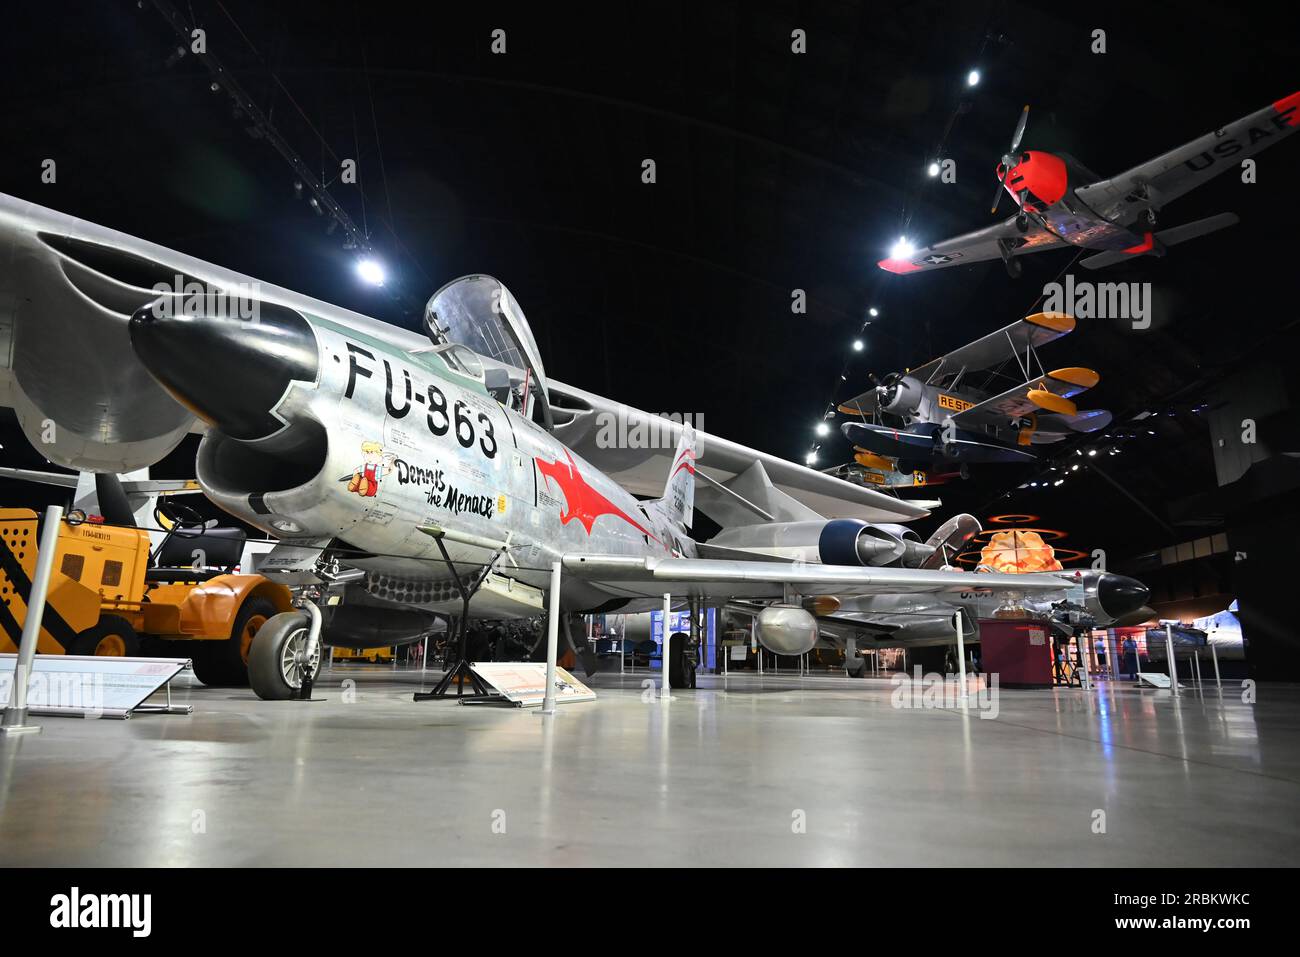 A USAF F-86D Sabre attack aircraft used in the first Iraq war on display at the US Air Force National Museum in Dayton, Ohio. Stock Photo